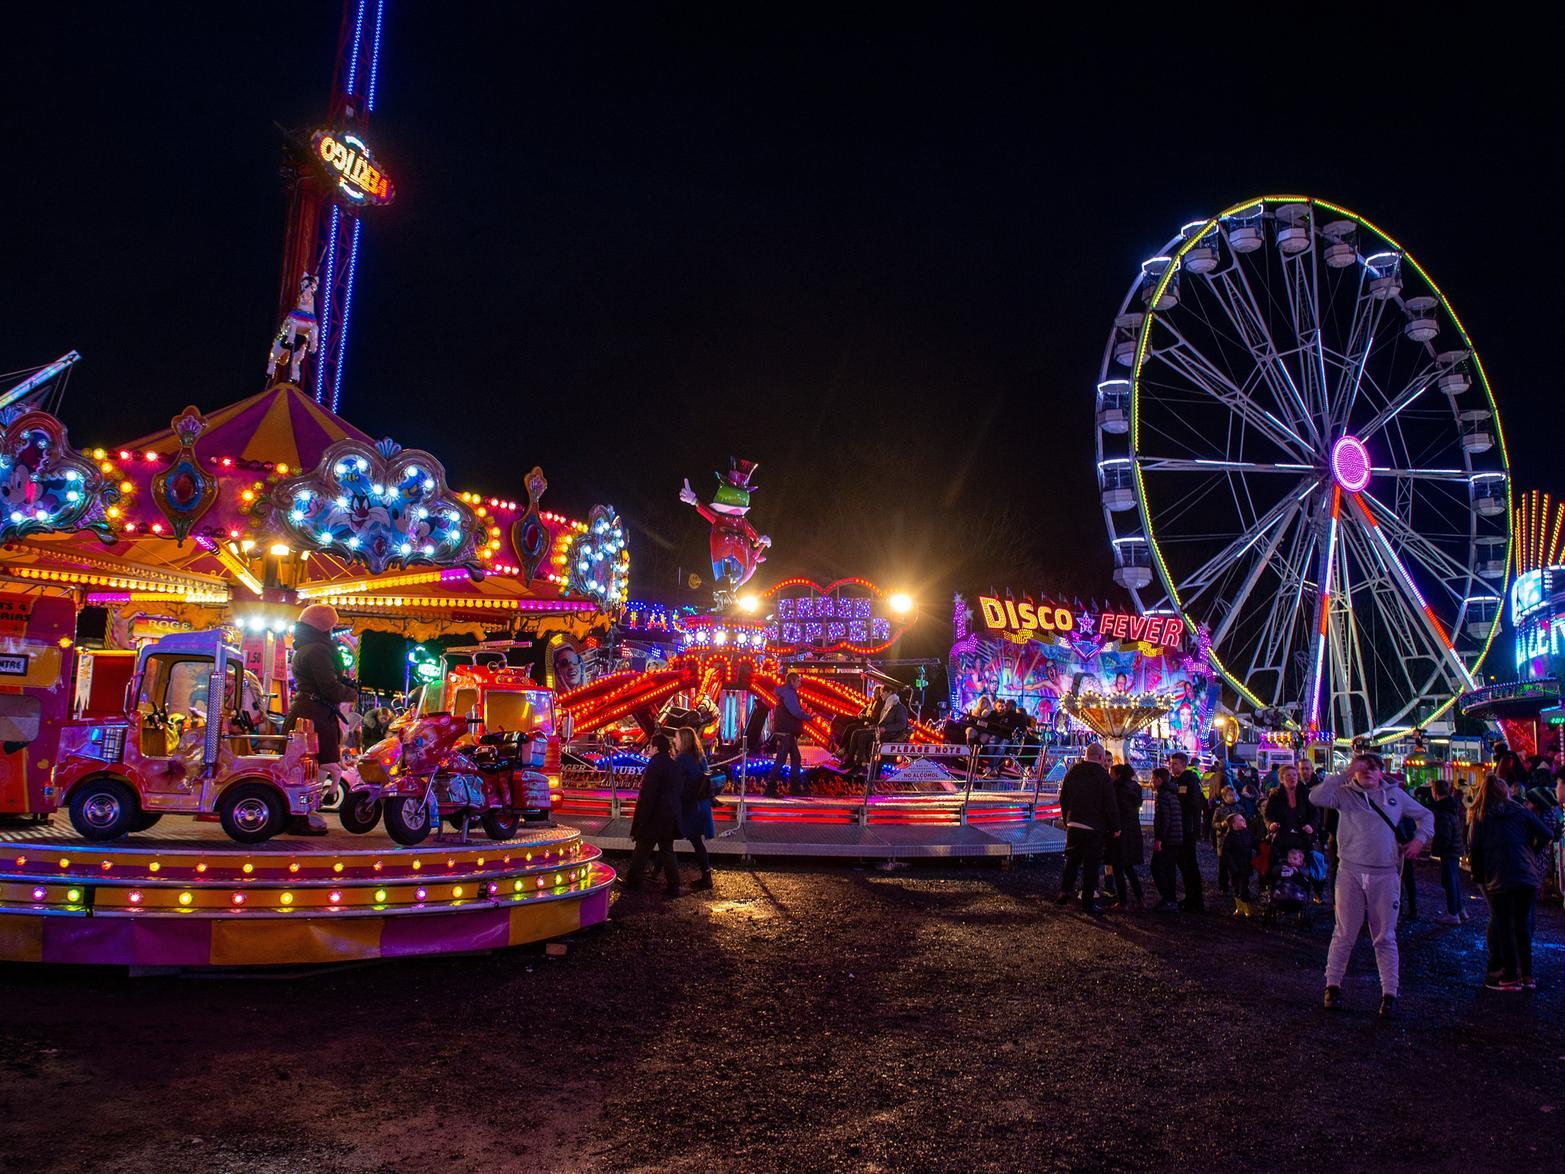 "Leeds Council has been fantastic. They've resurfaced the ground and the fair is looking really good on this site" - Roger Tuby, of International Fun Fairs.